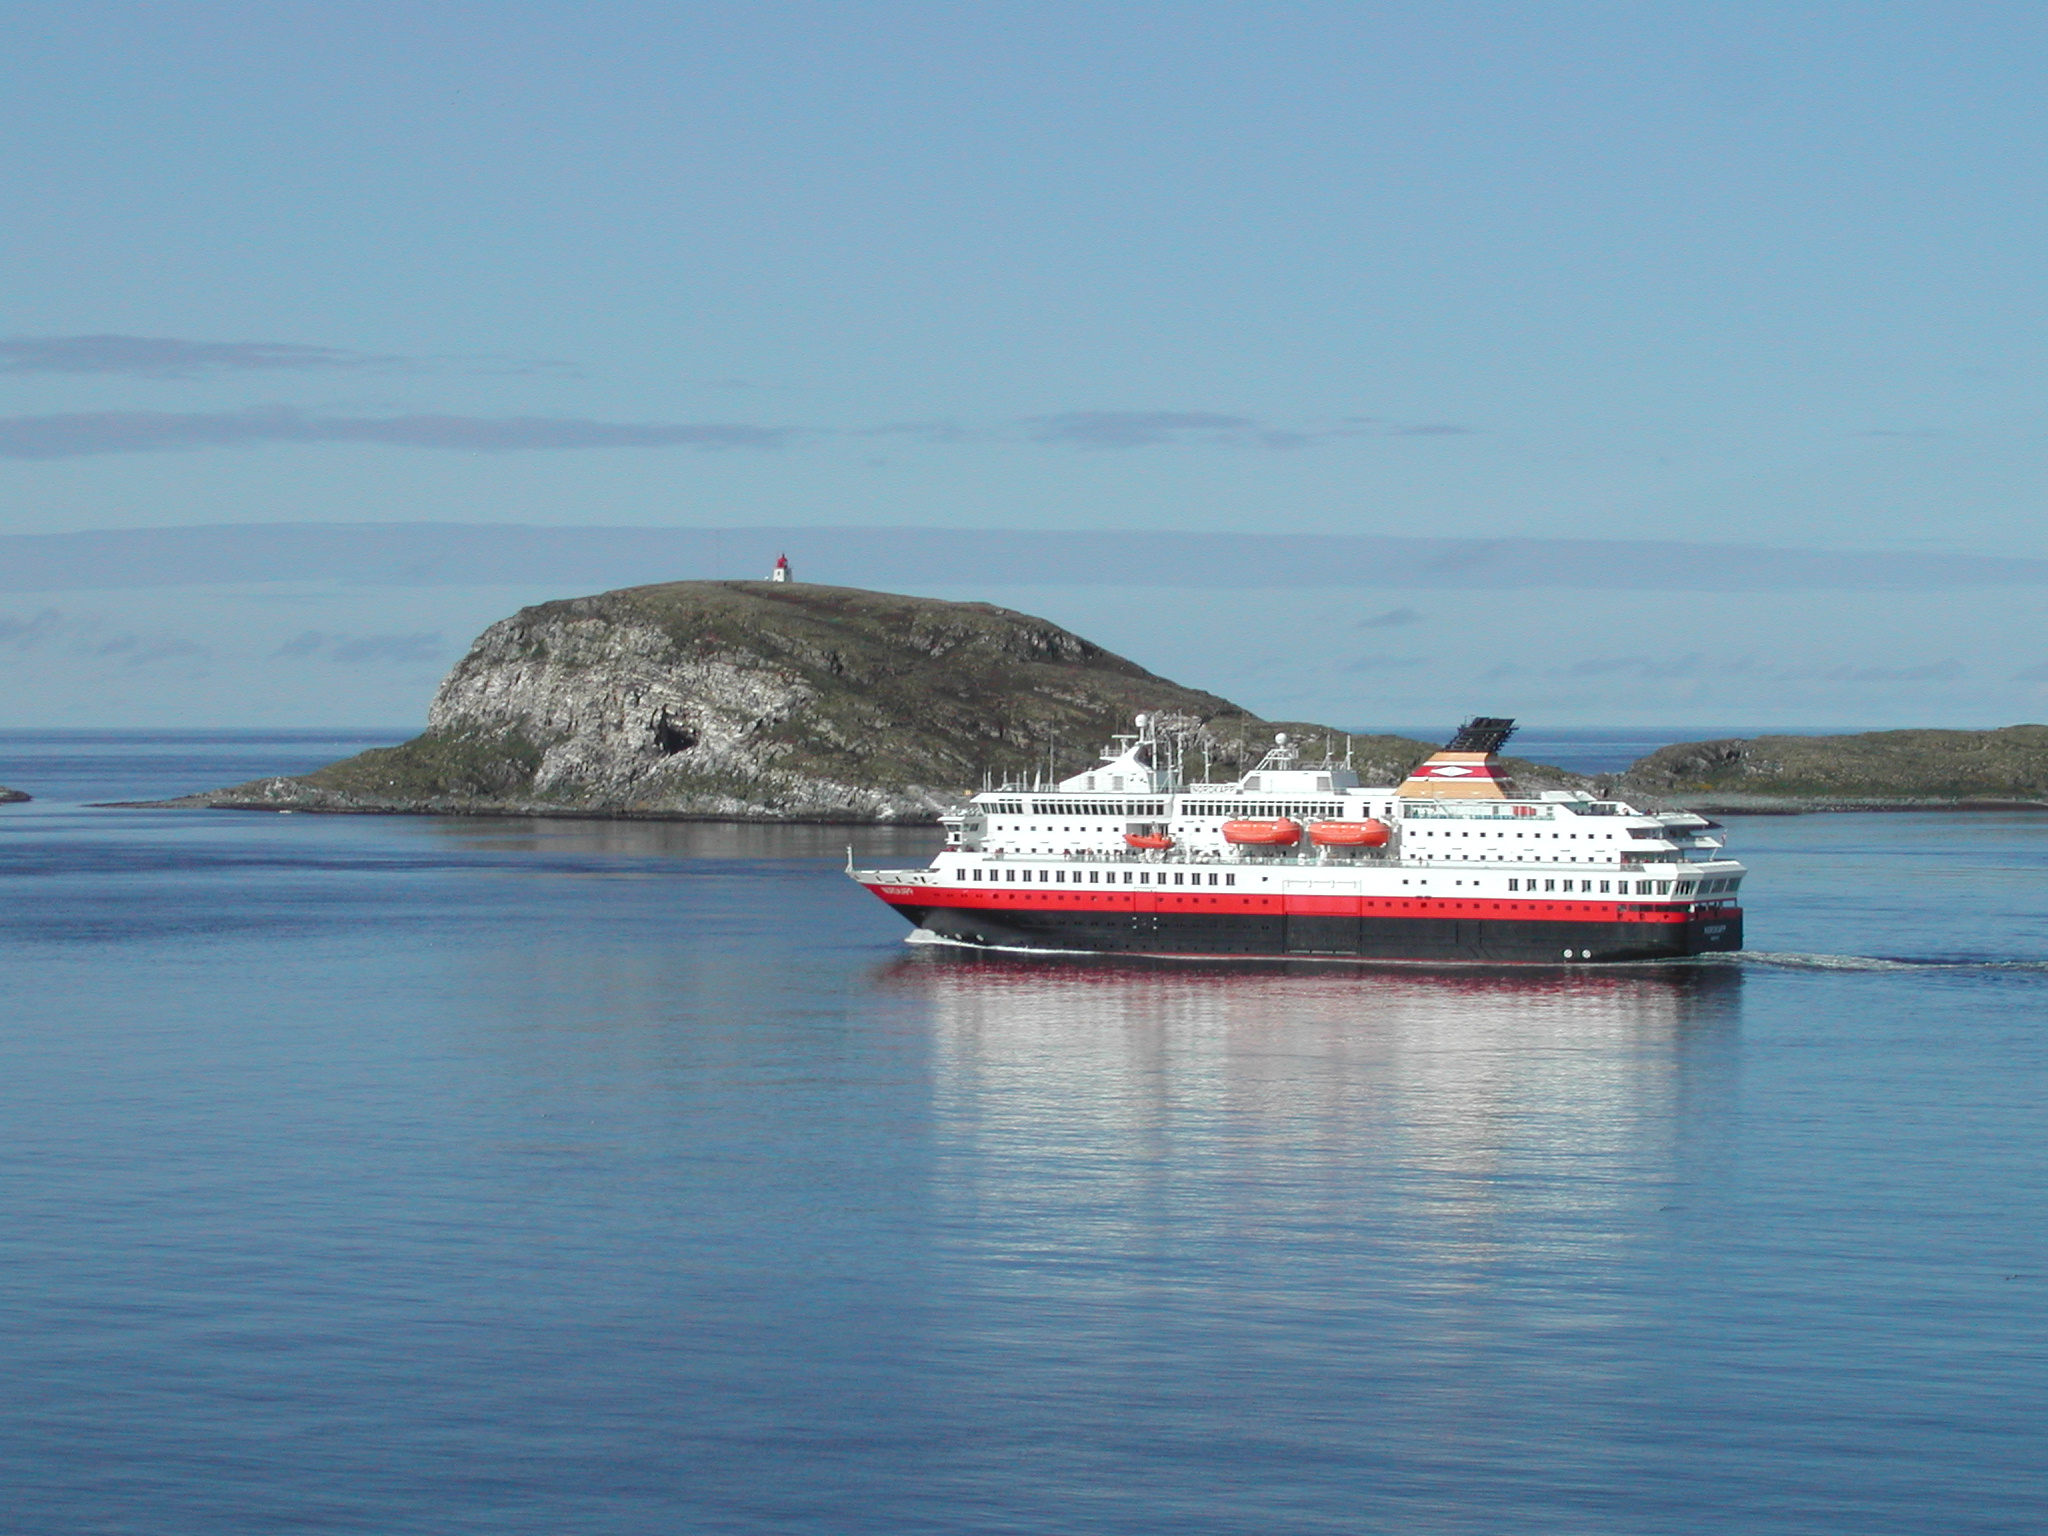 The Hurtigruten passes right by Hornøya on its way to and from Vardø. It's not uncommon to see many of the birds either flying around or in the water as you pass by © Are Olaussen